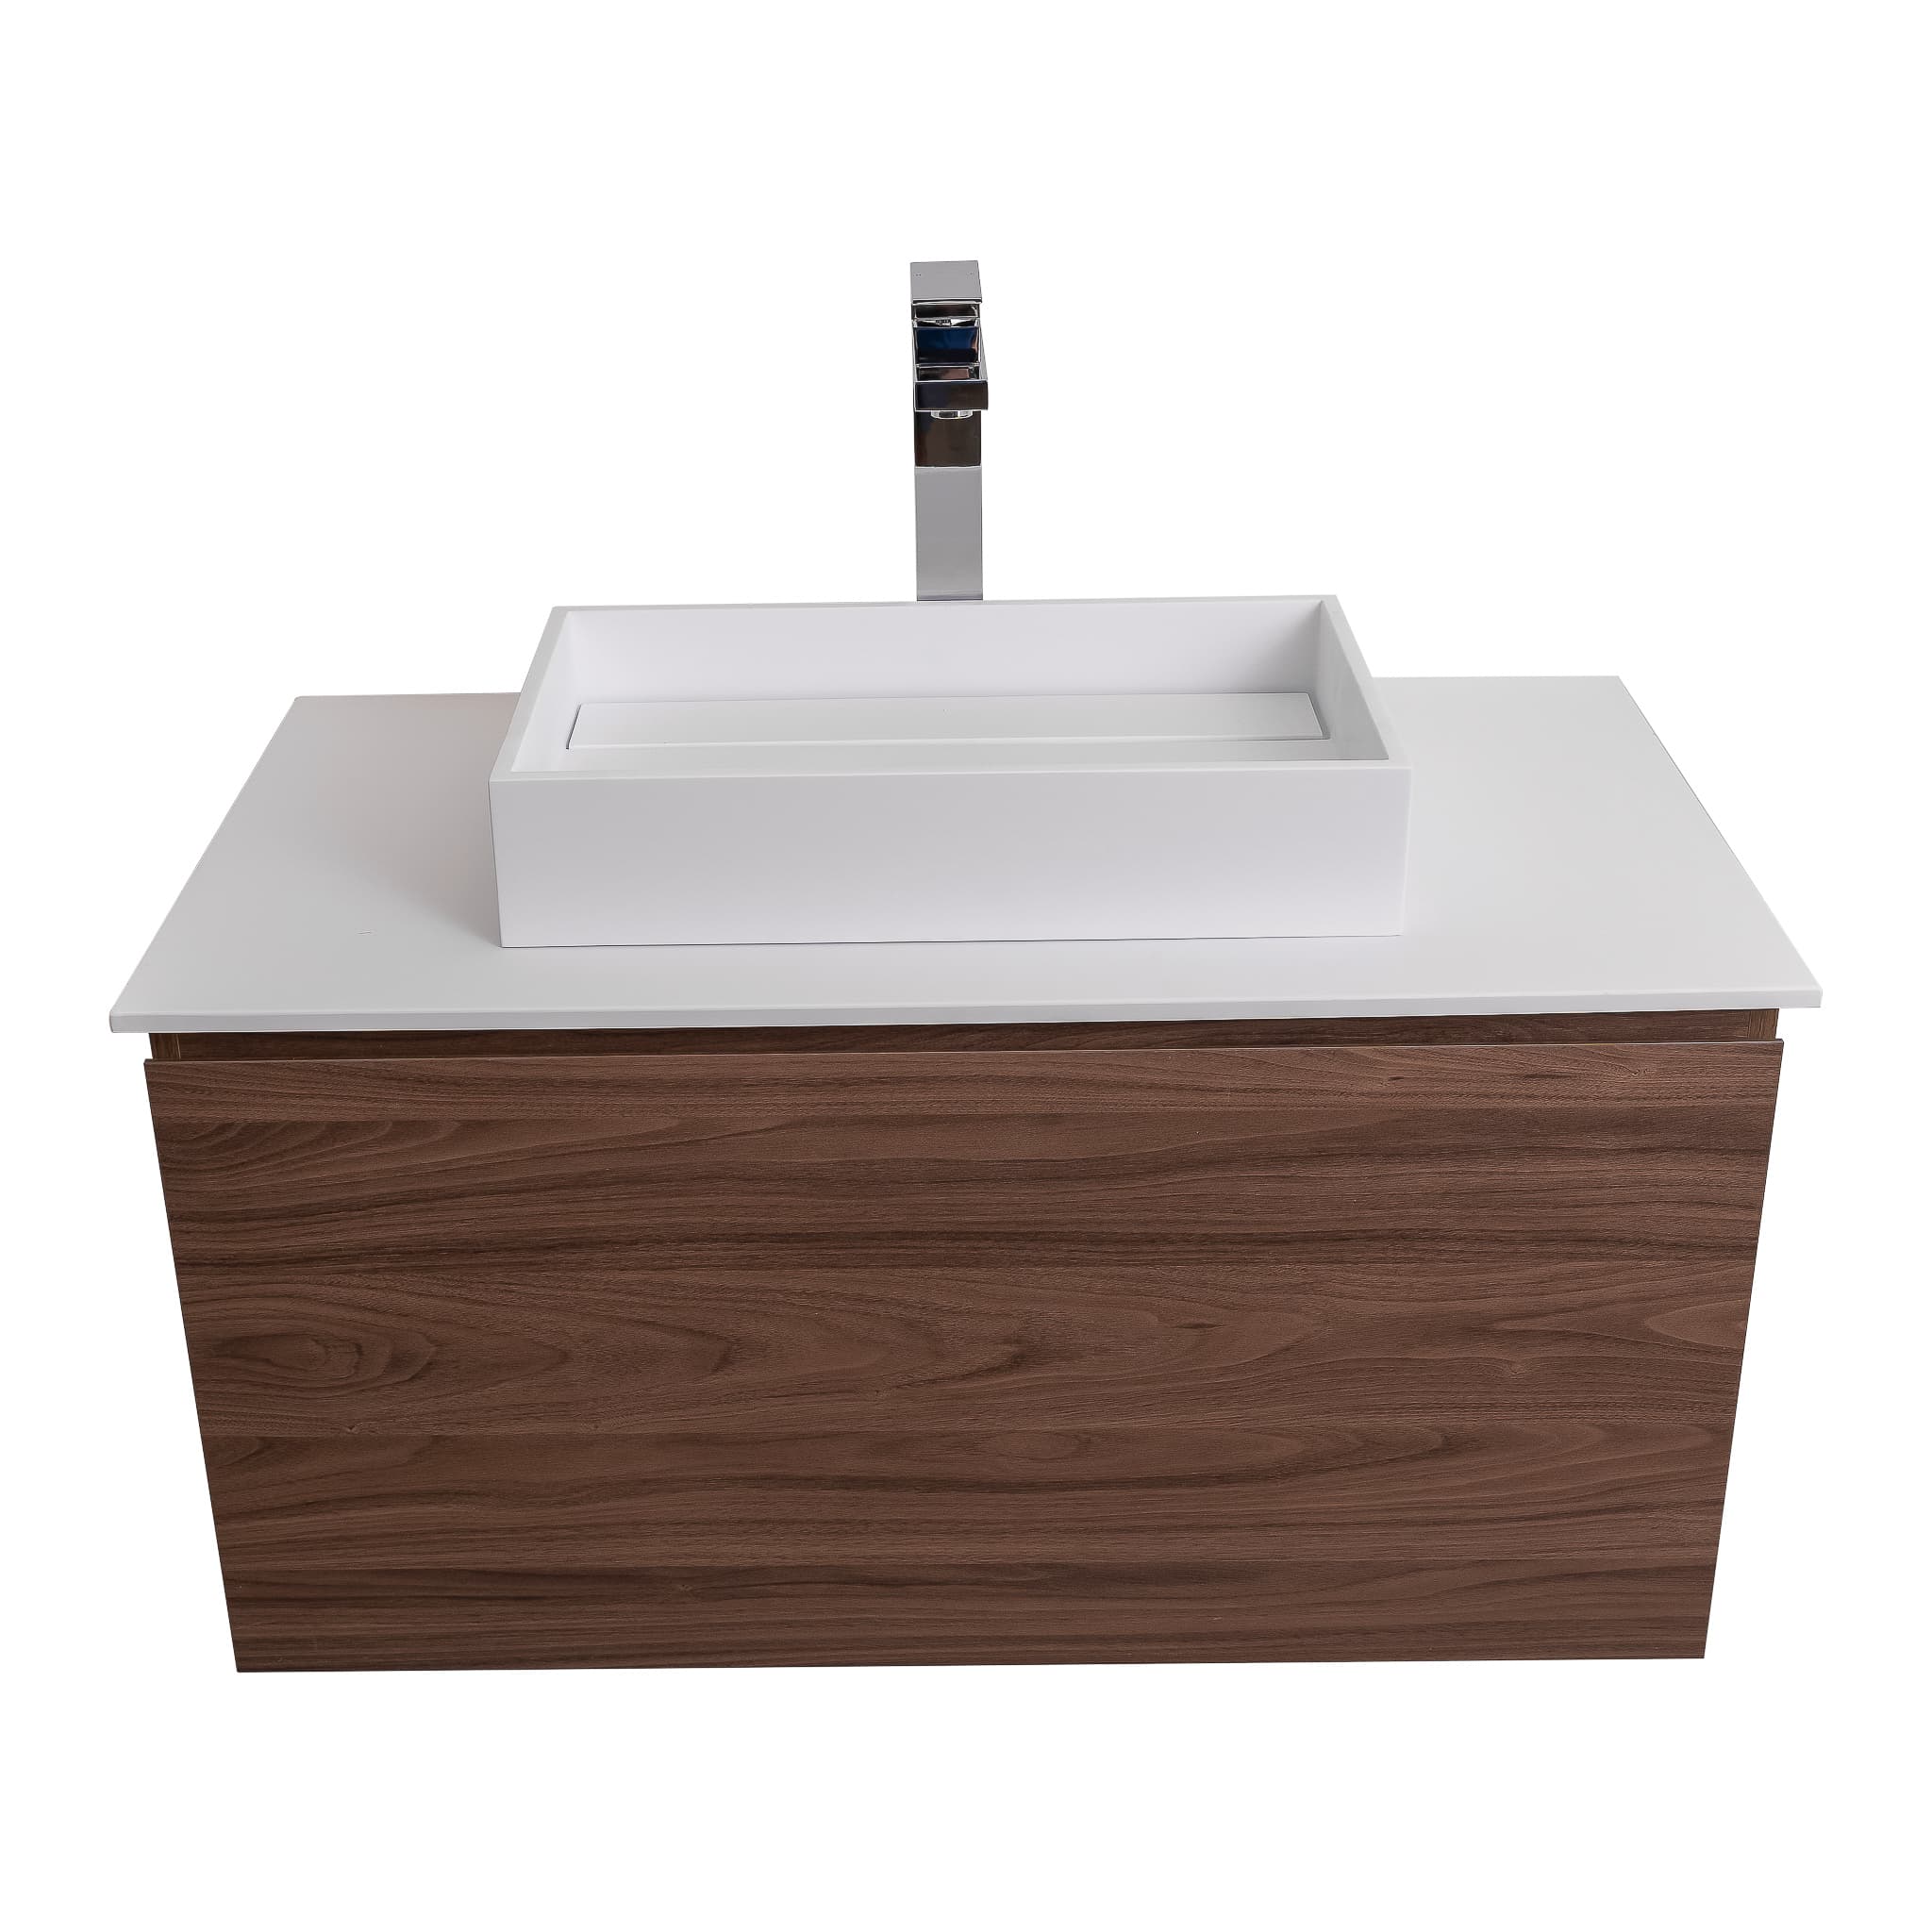 Venice 39.5 Walnut Wood Texture Cabinet, Solid Surface Flat White Counter And Infinity Square Solid Surface White Basin 1329, Wall Mounted Modern Vanity Set